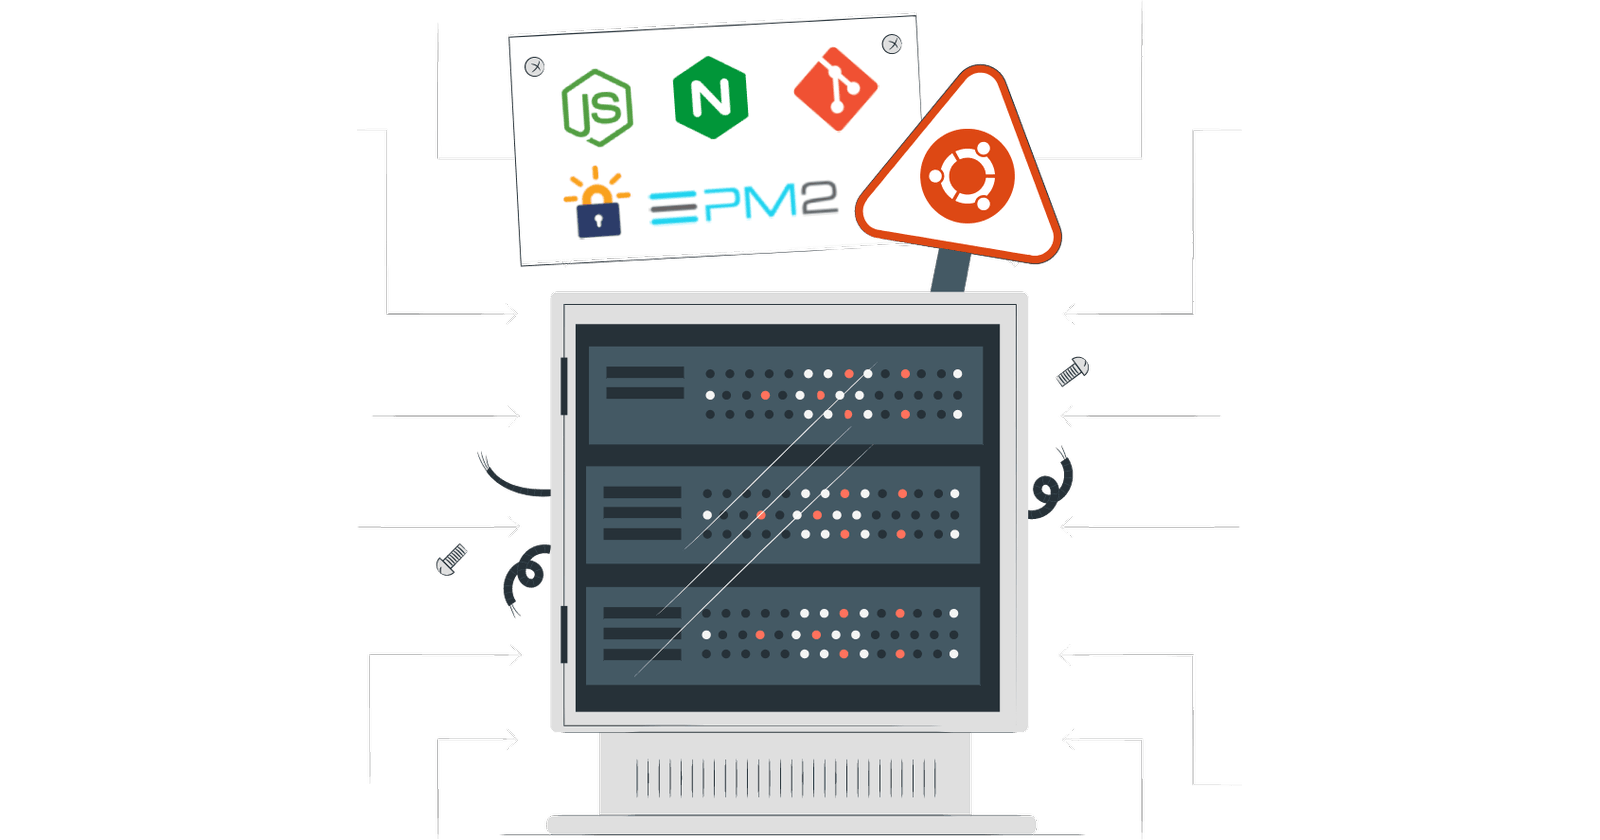 A complete and straightforward guide to Node.js, Nginx, Git Deploy, and PM2 on Ubuntu.